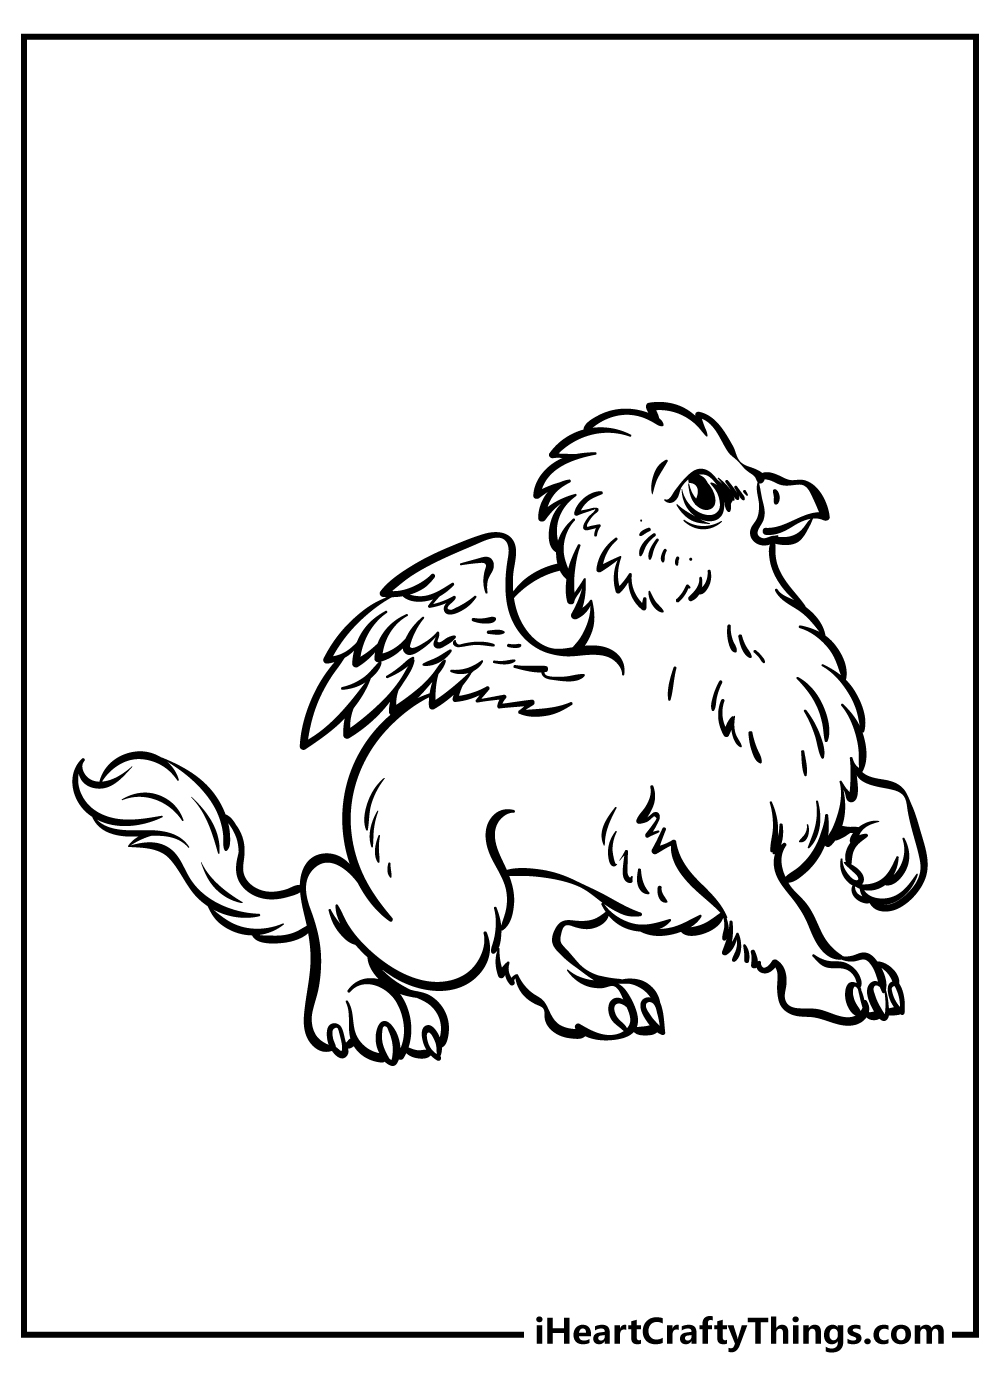 Griffin Coloring Book for adults free download